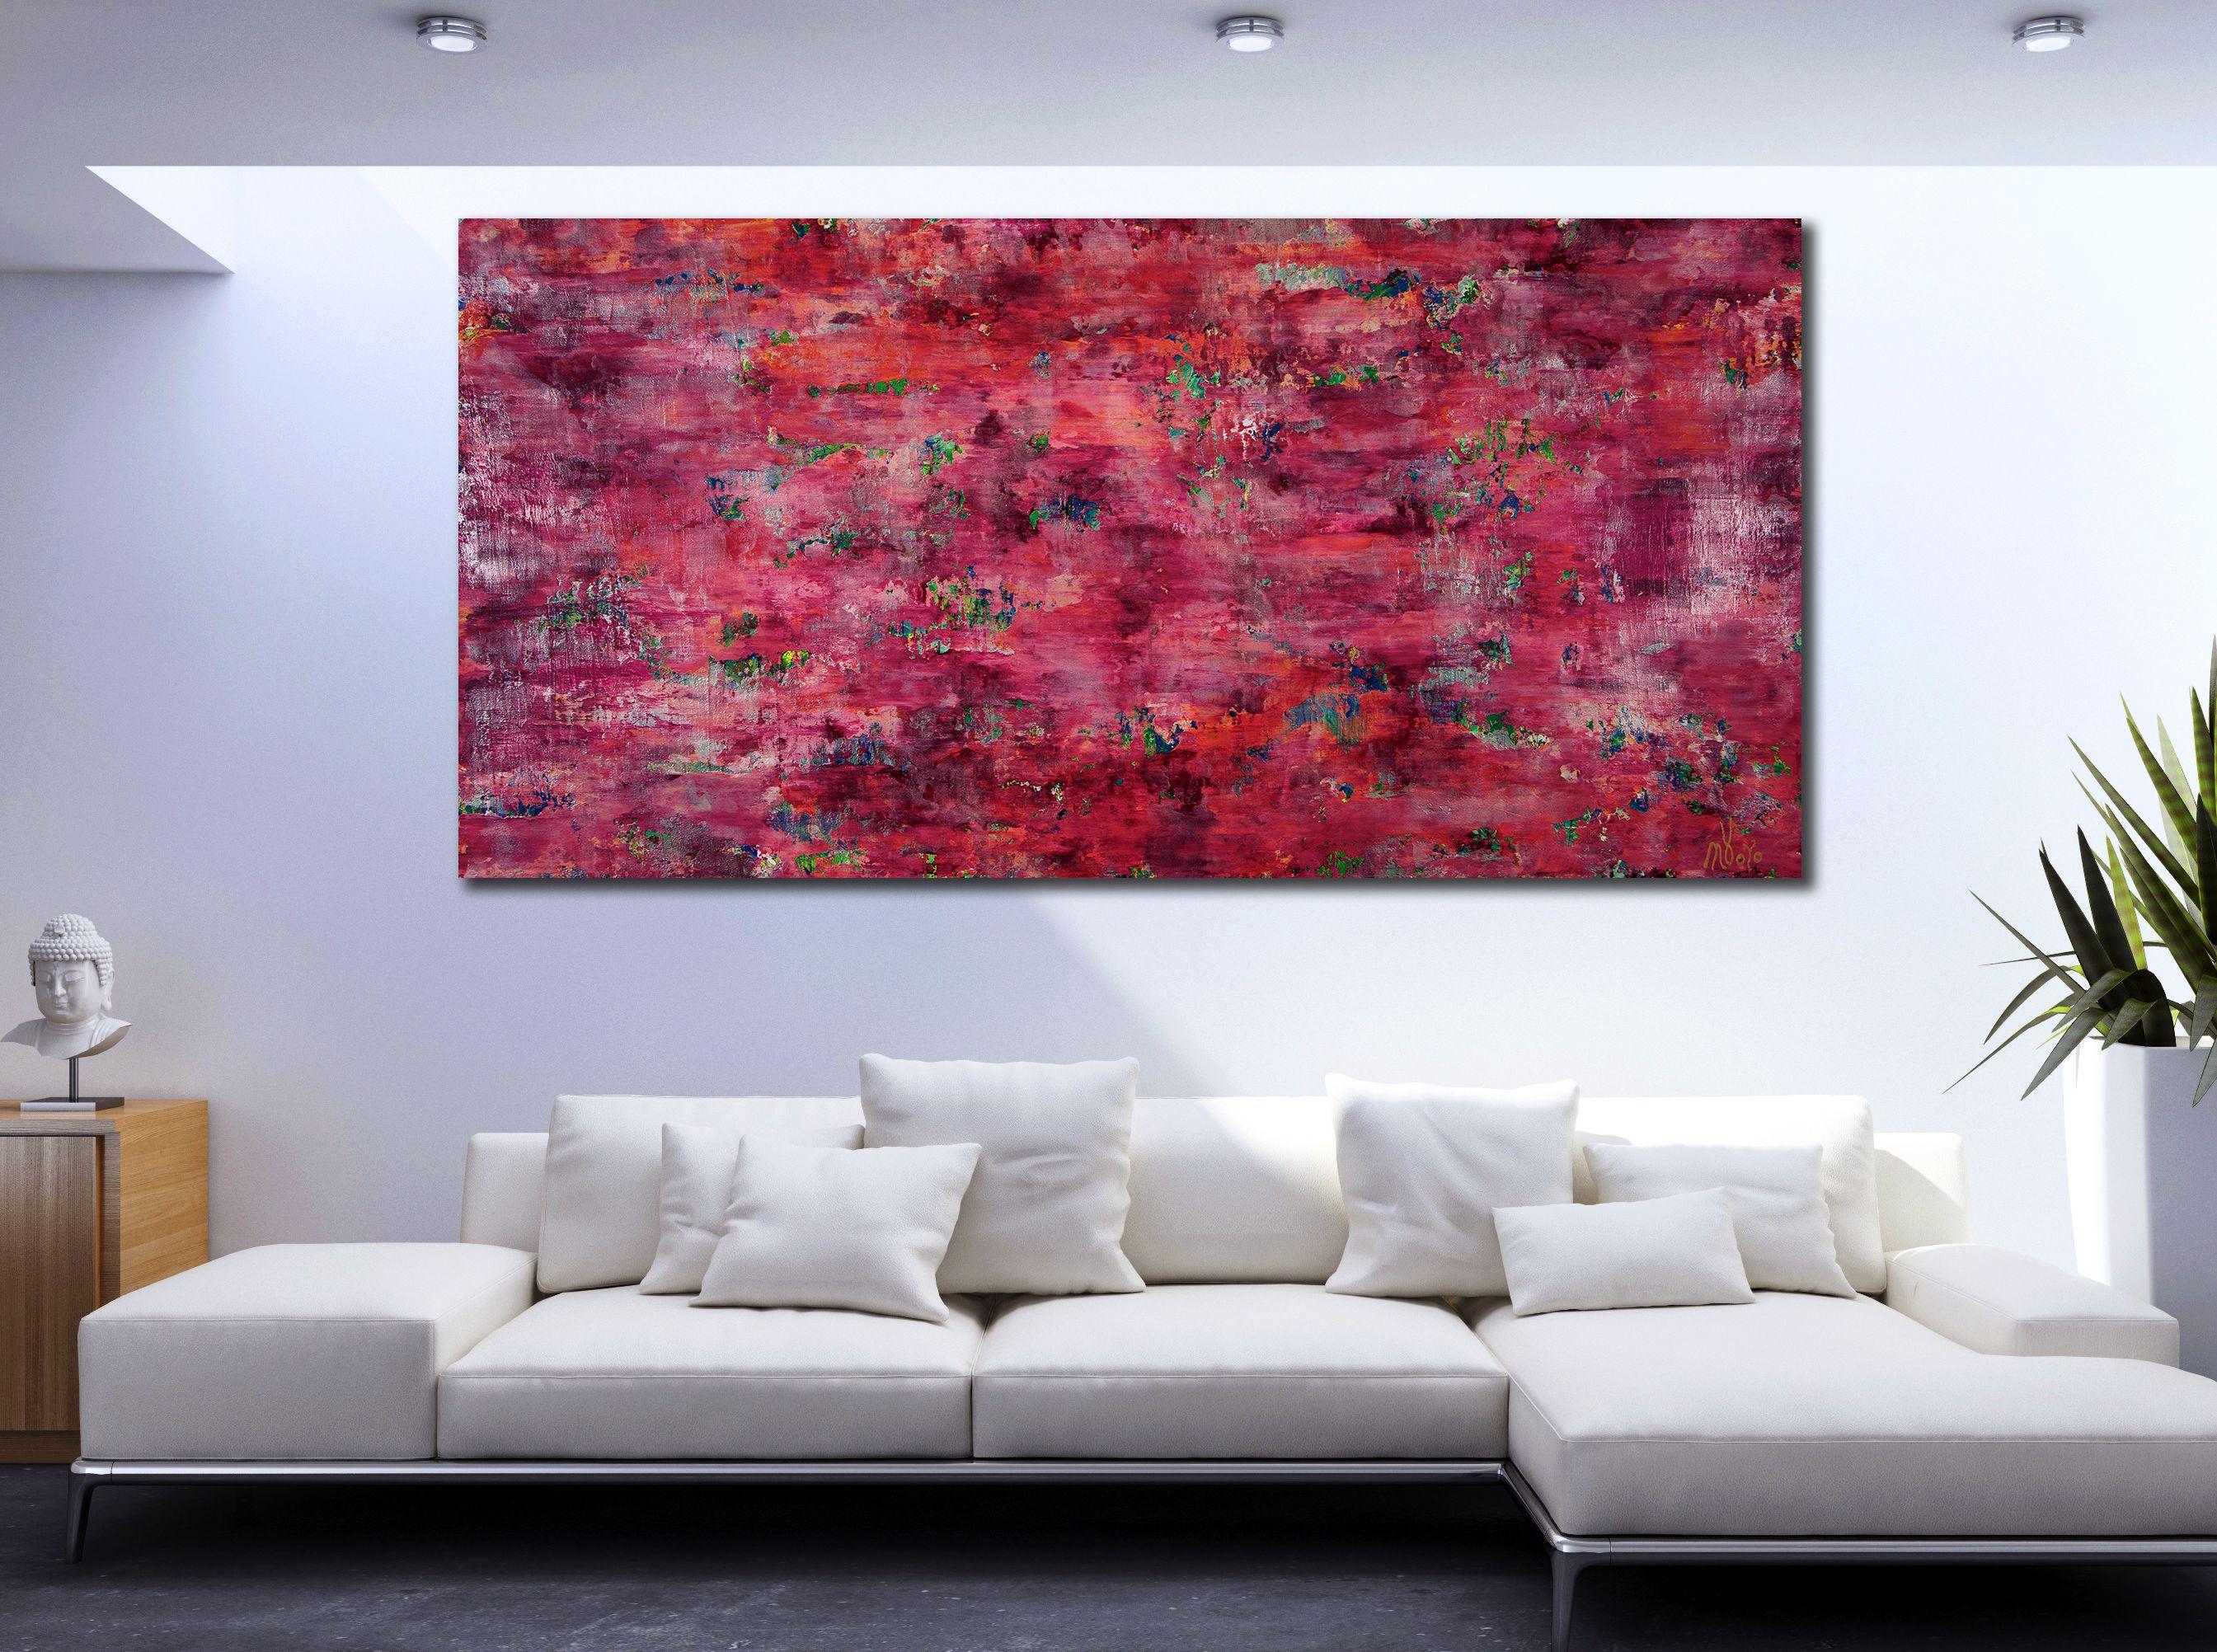 Bright pink window view, Mixed Media on Canvas - Abstract Expressionist Mixed Media Art by Nestor Toro